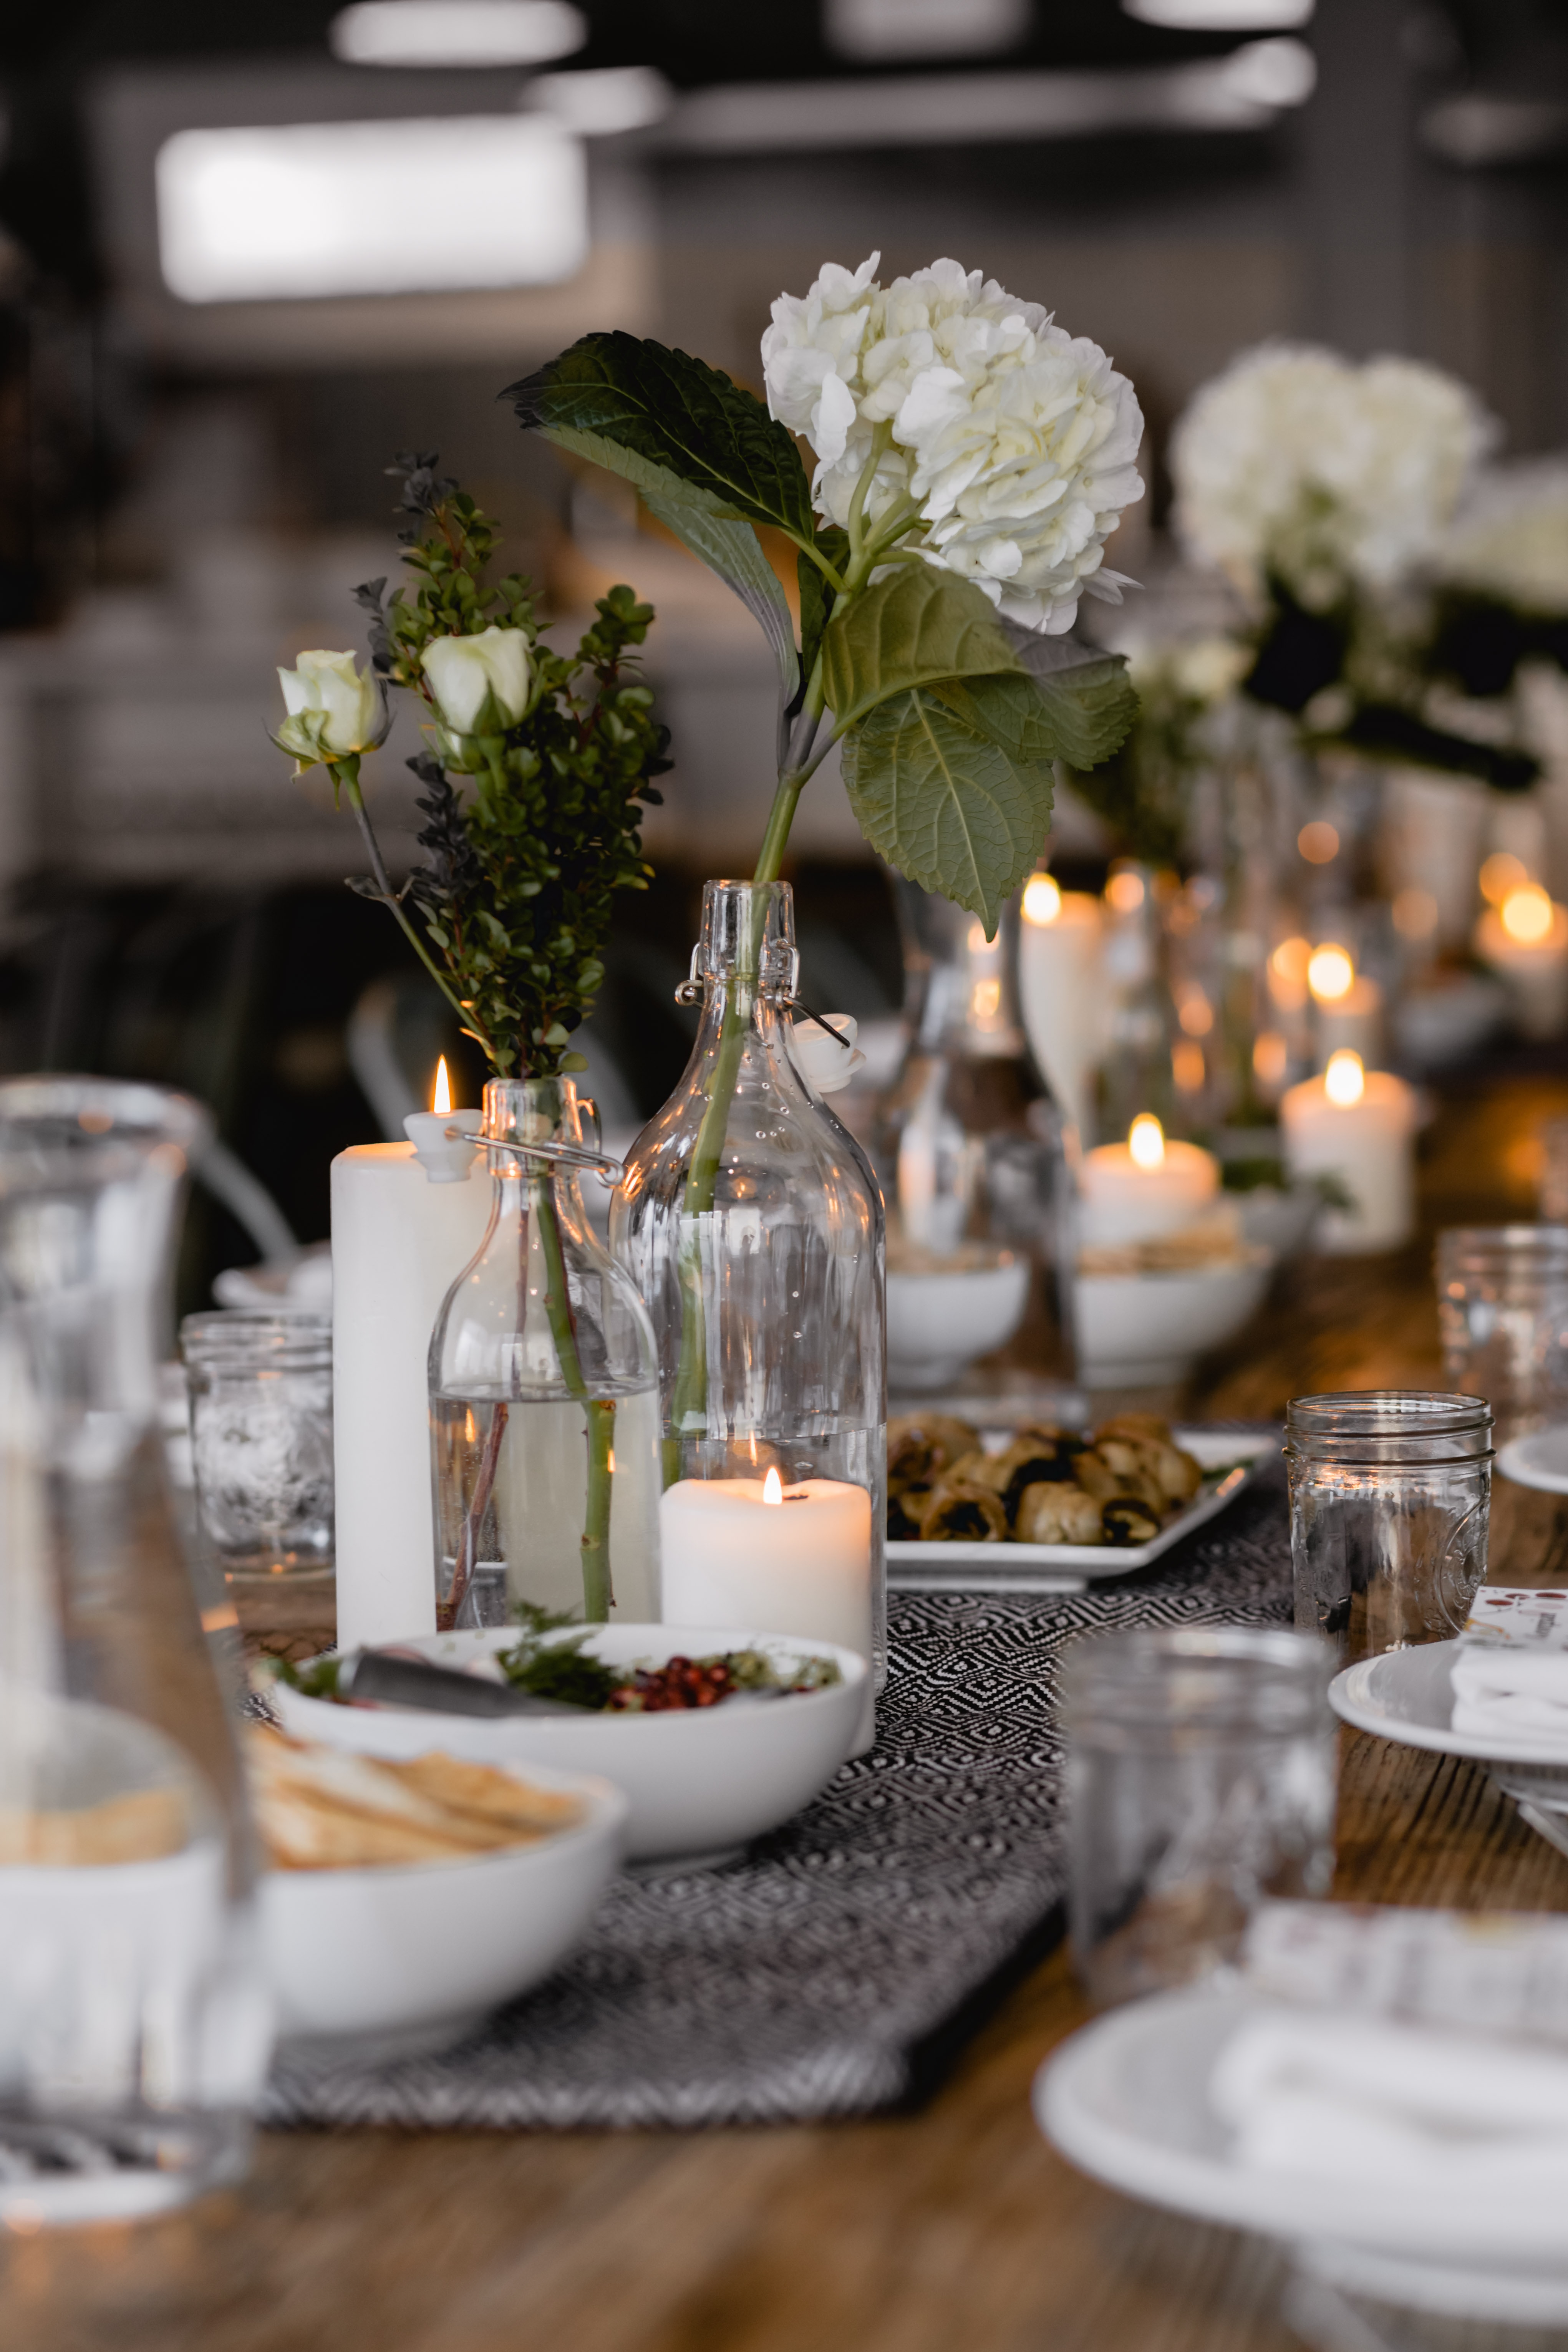 image of a place setting